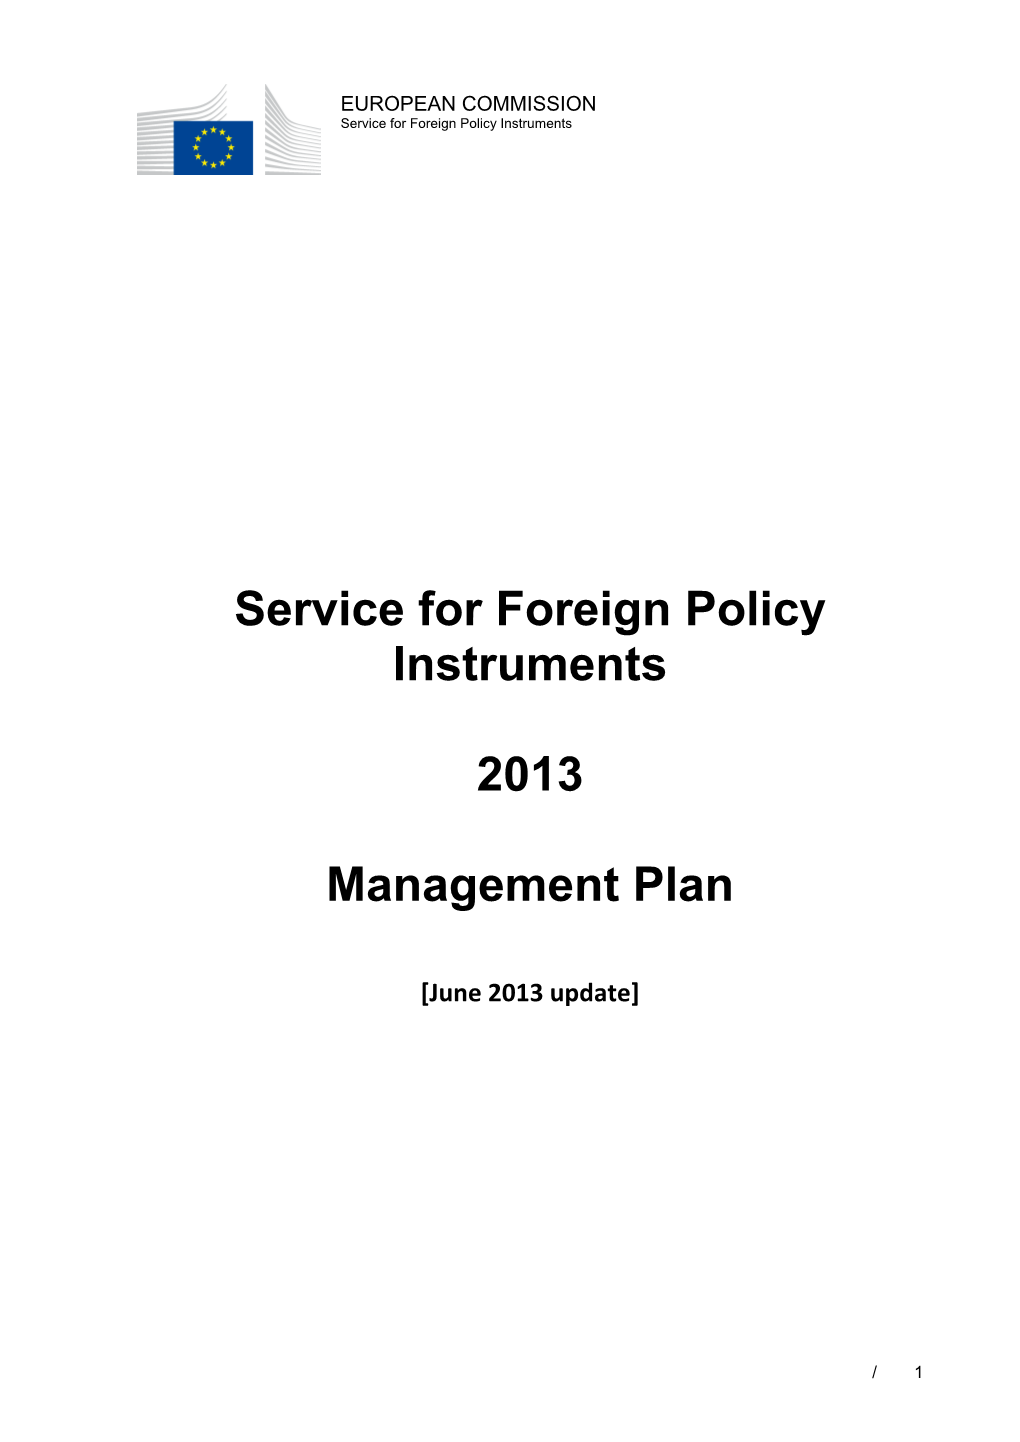 Service for Foreign Policy Instruments 2013 MANAGEMENT PLAN